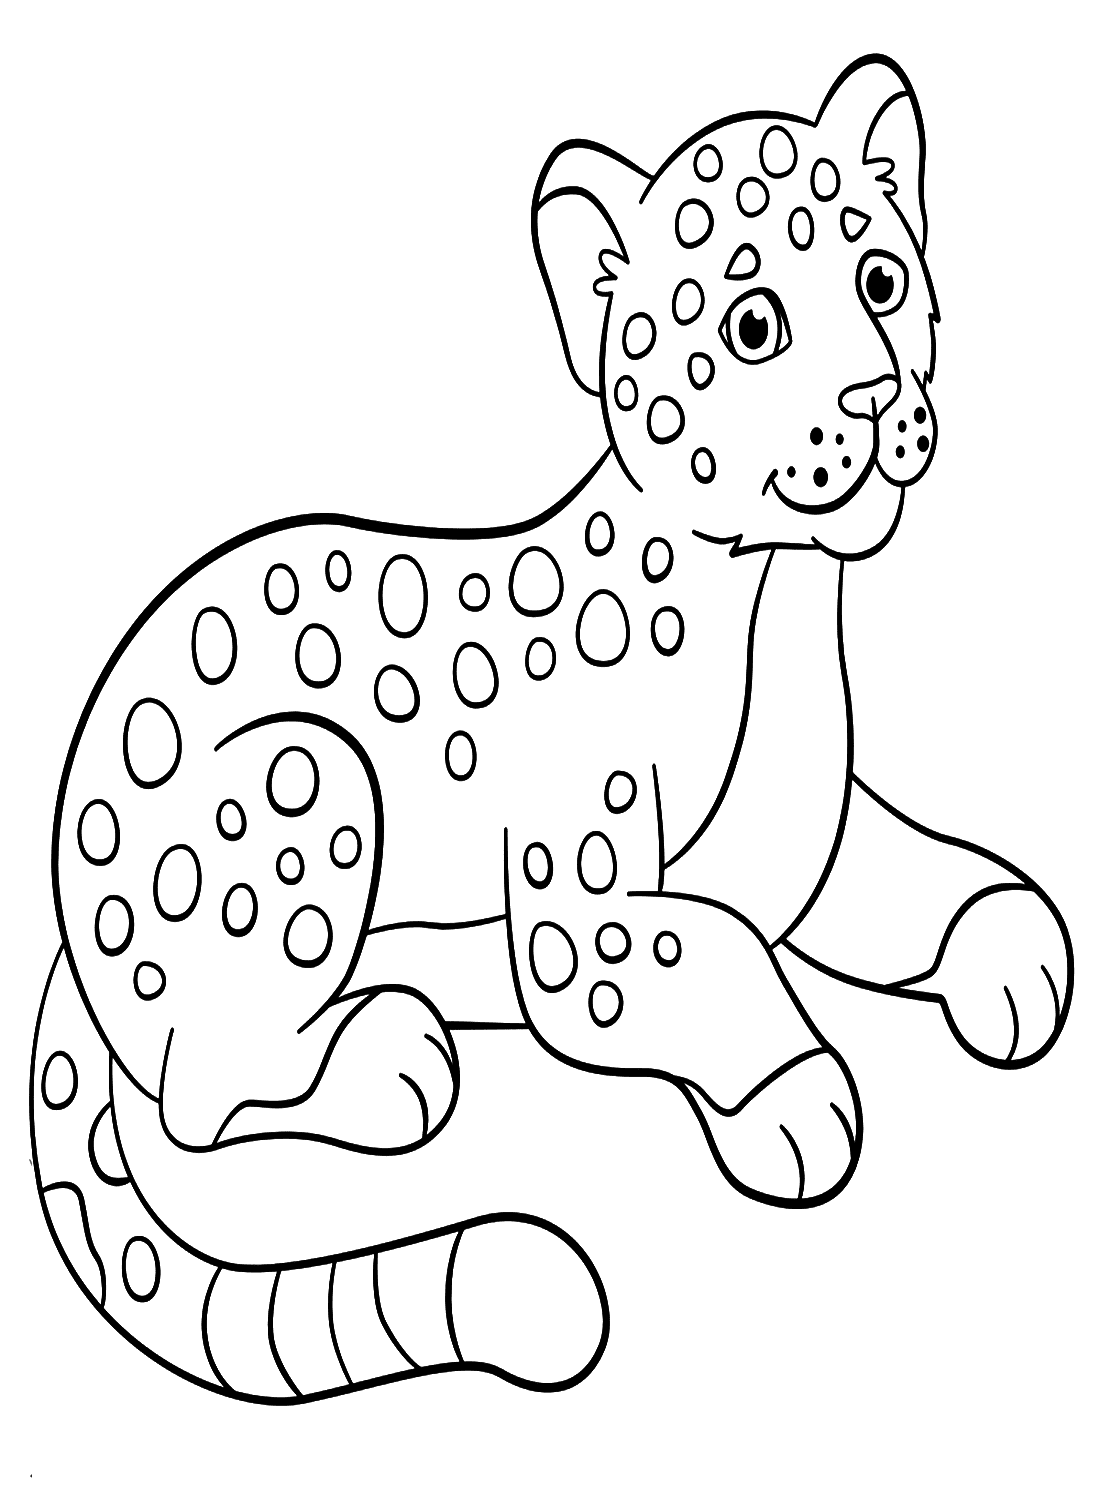 Lovely Jaguar Resting Coloring Page - Free Printable Coloring Pages